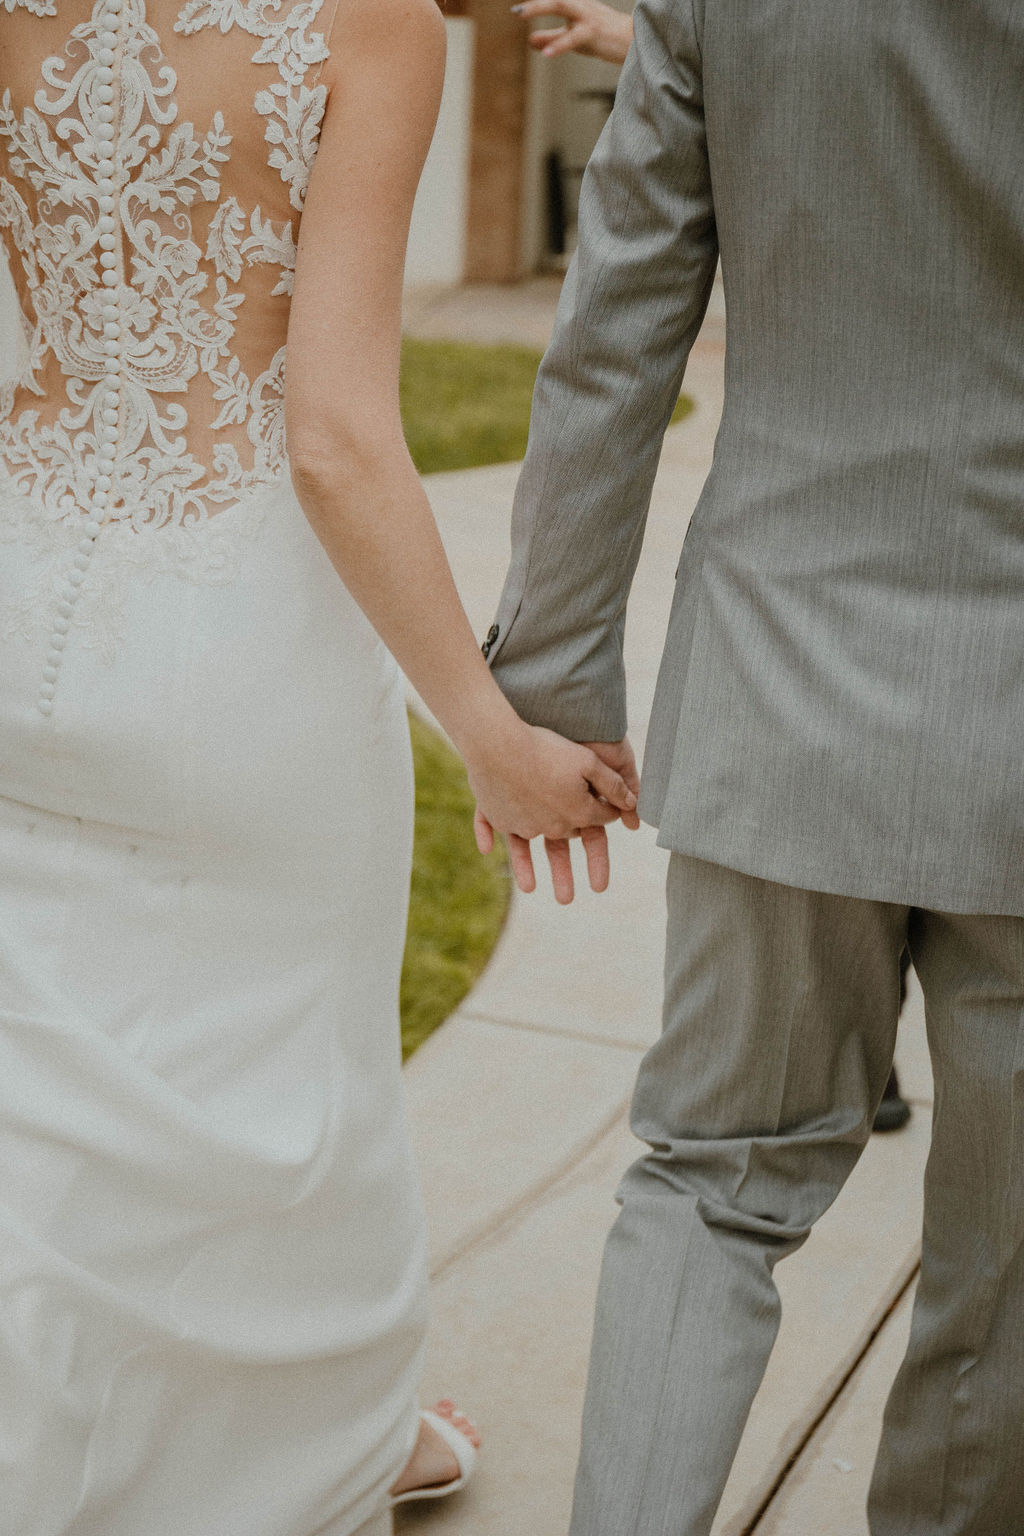 the couple holding hands as they walk at the California wedding venue